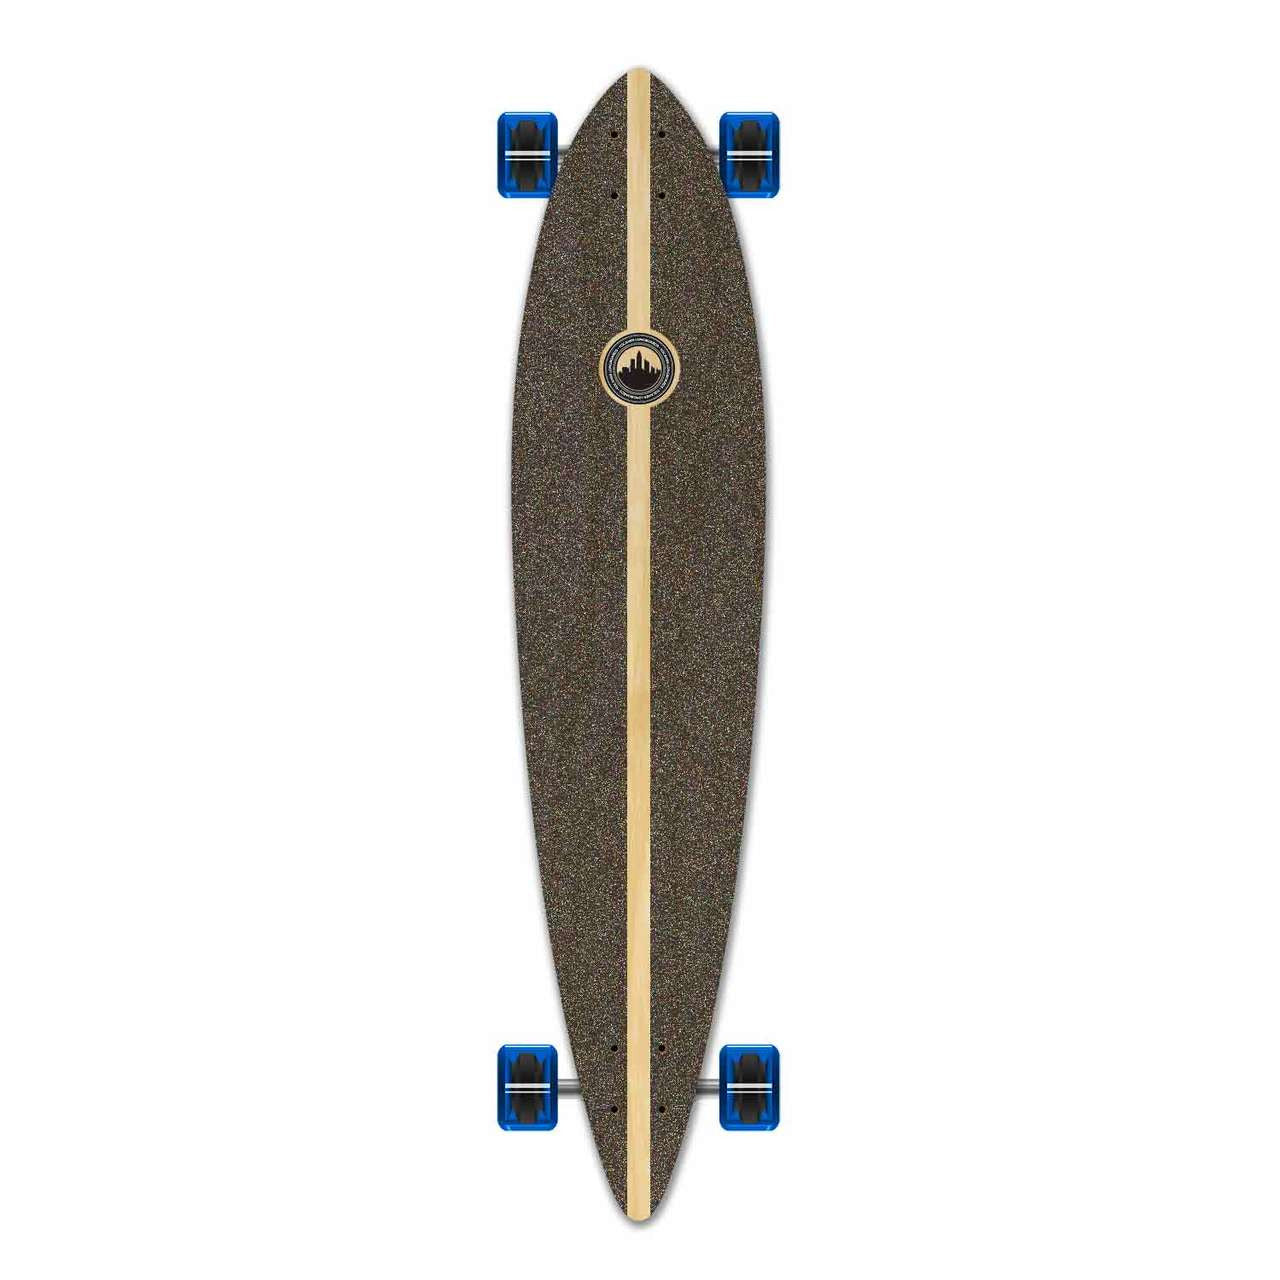 Yocaher Pintail Longboard Complete - Checker Blue